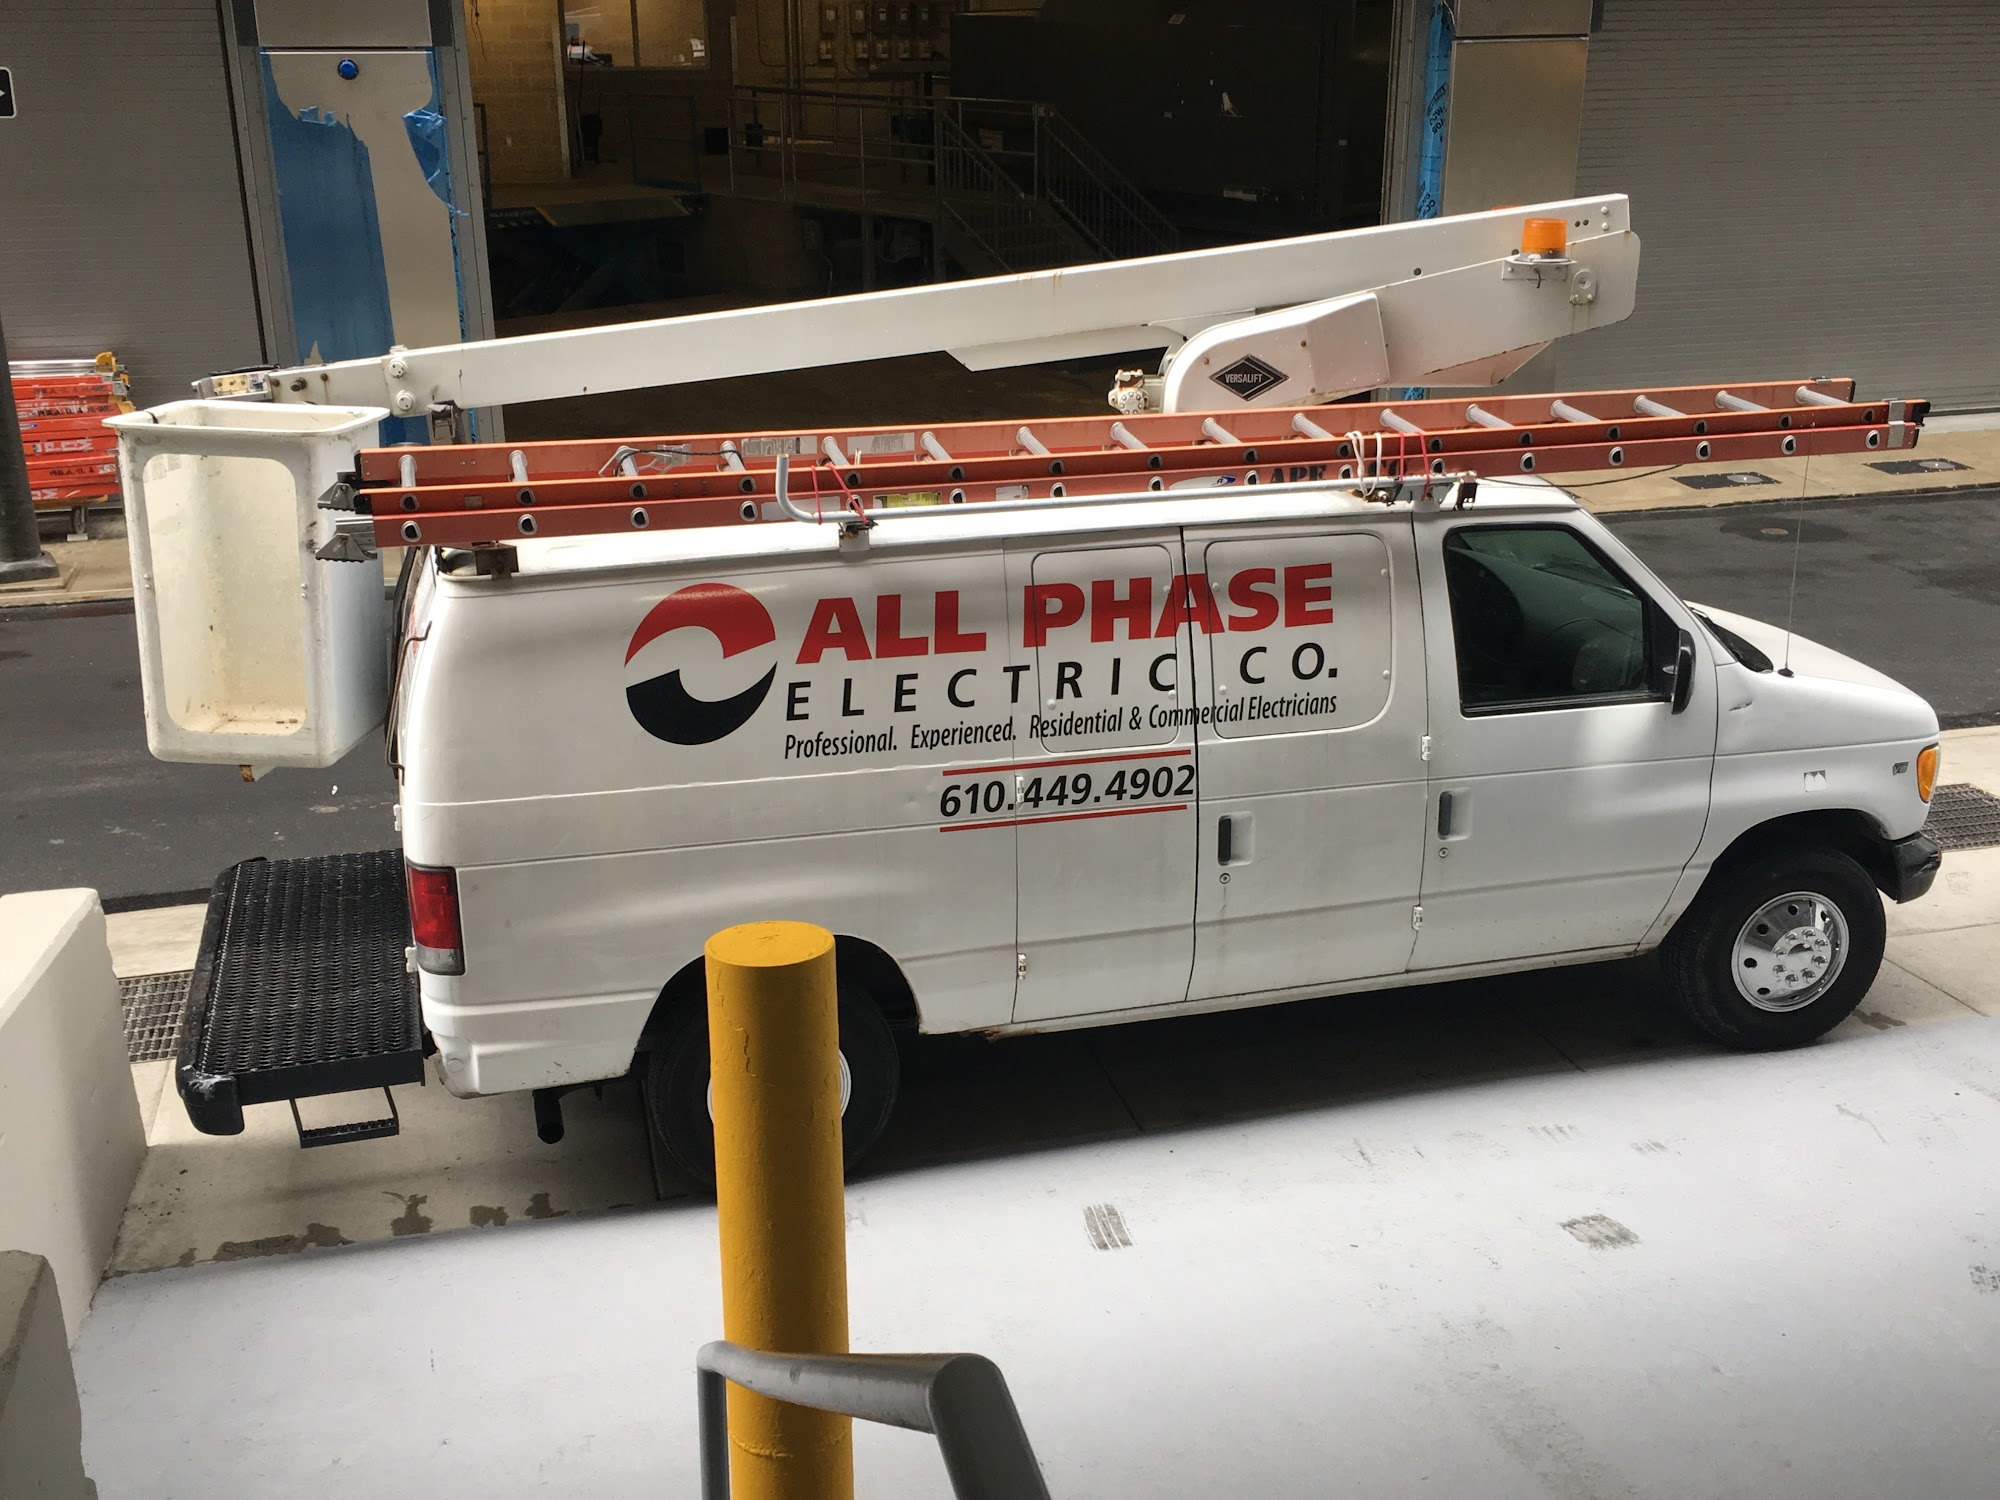 All Phase Electric Co